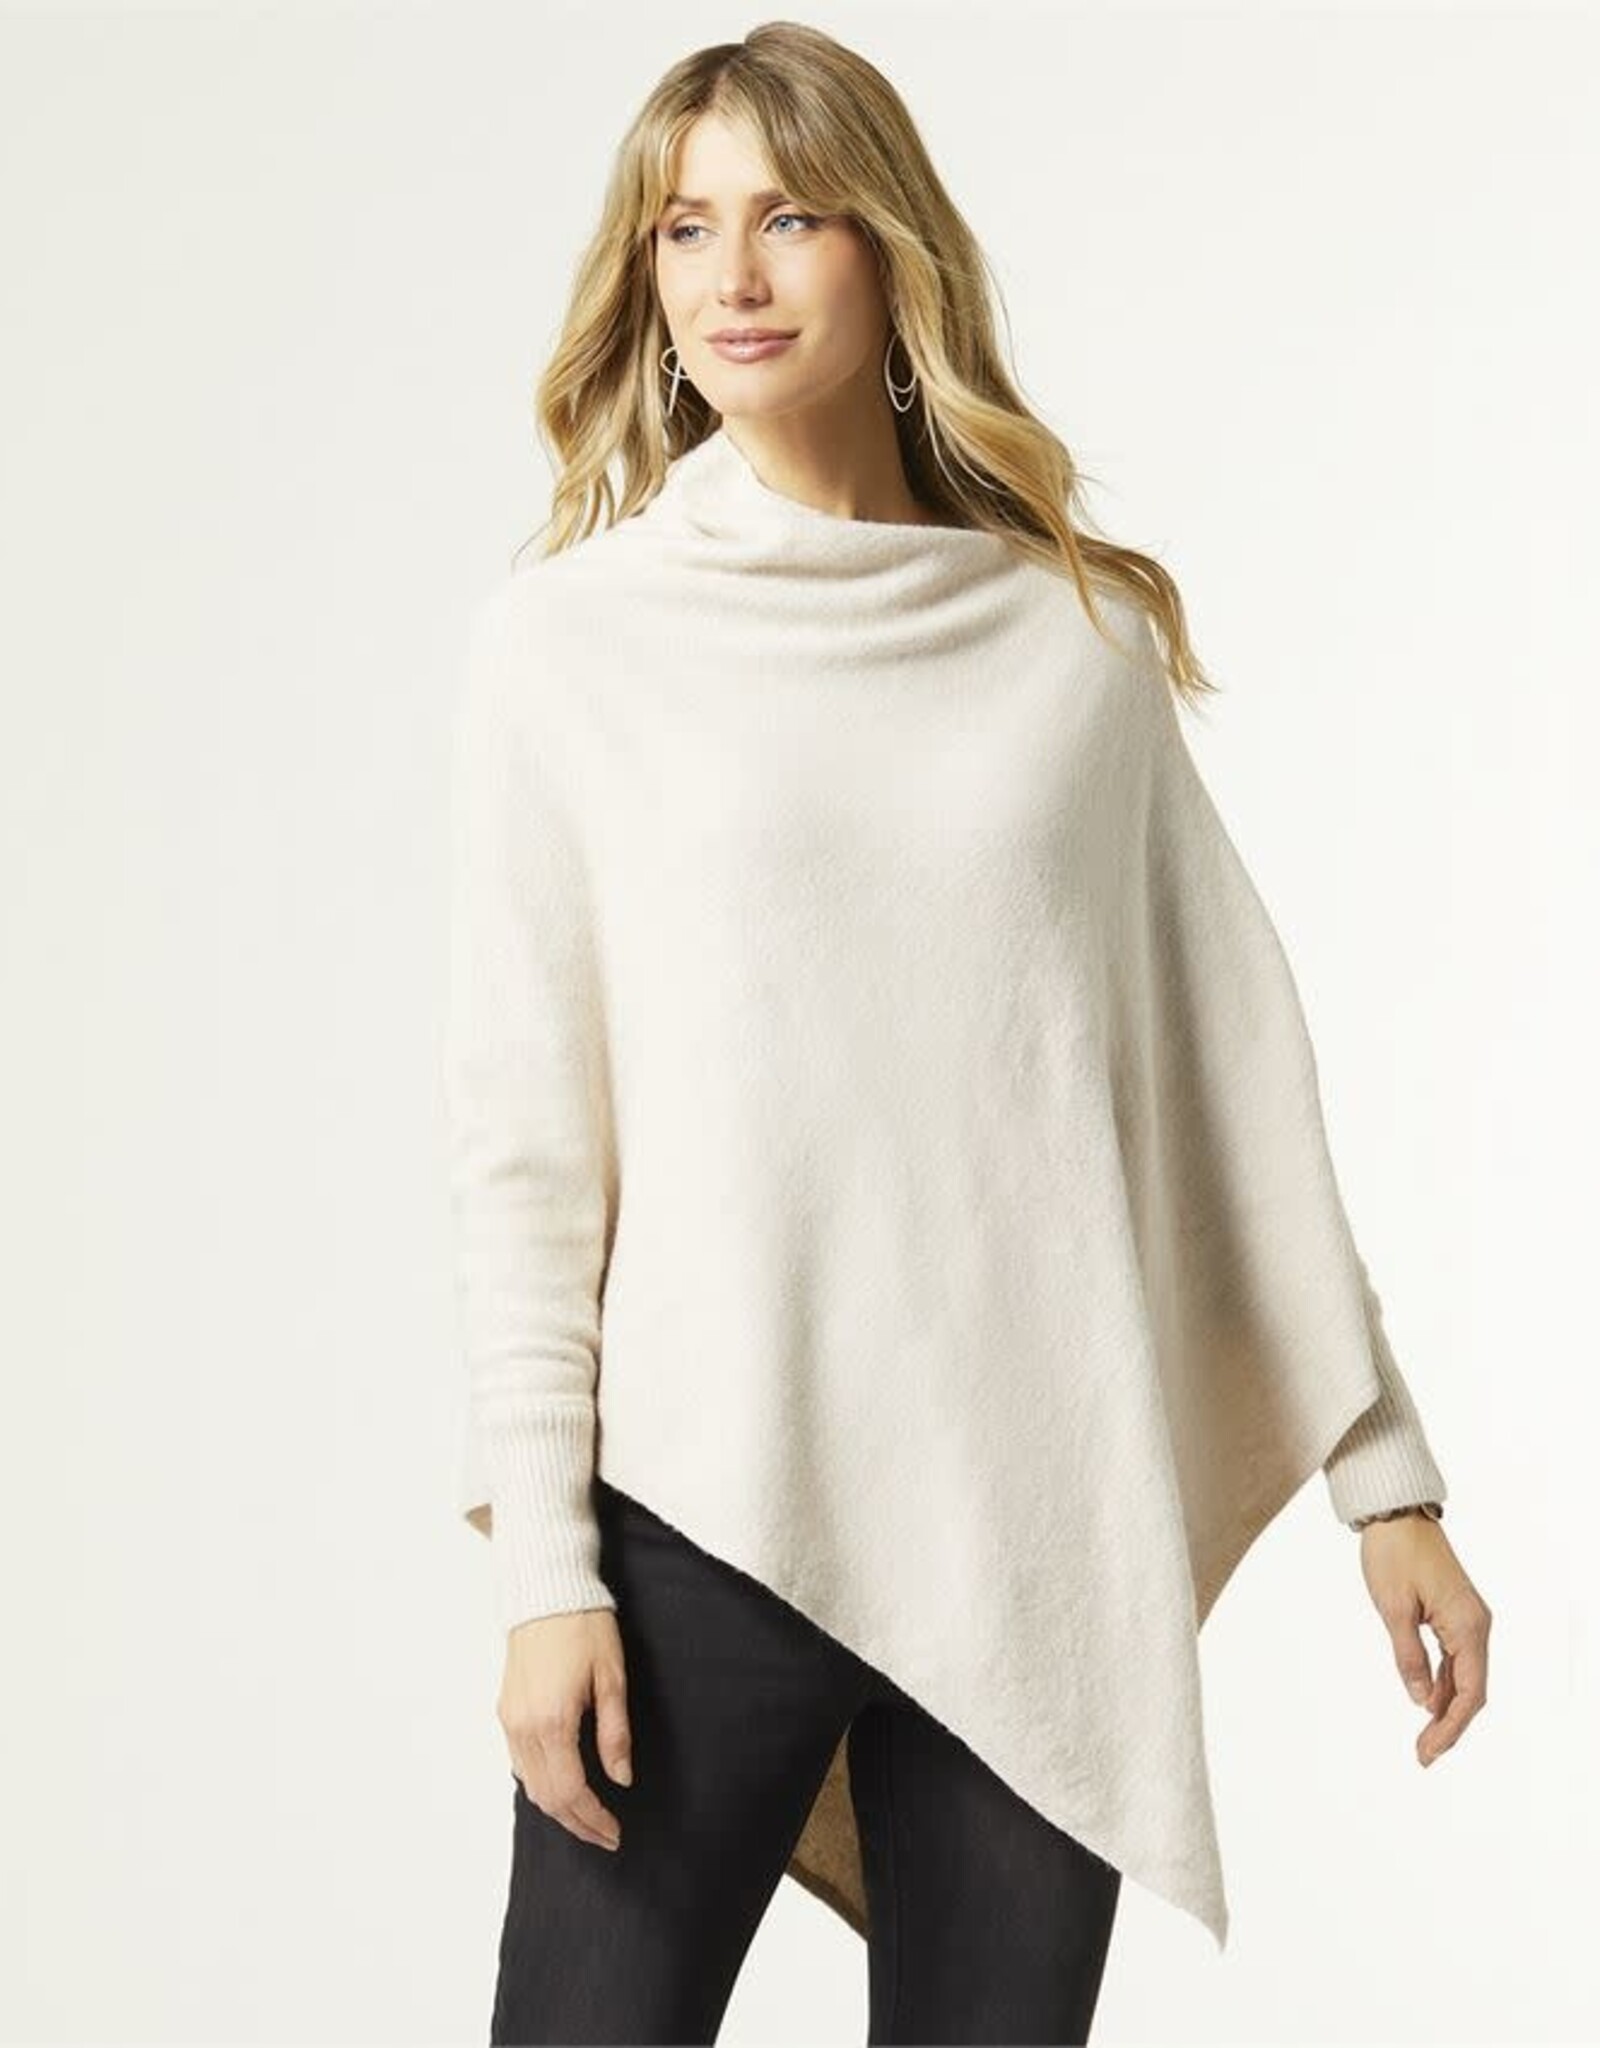 TGB / Good Bead DYLAN SWEATER PONCHO - multiple color options